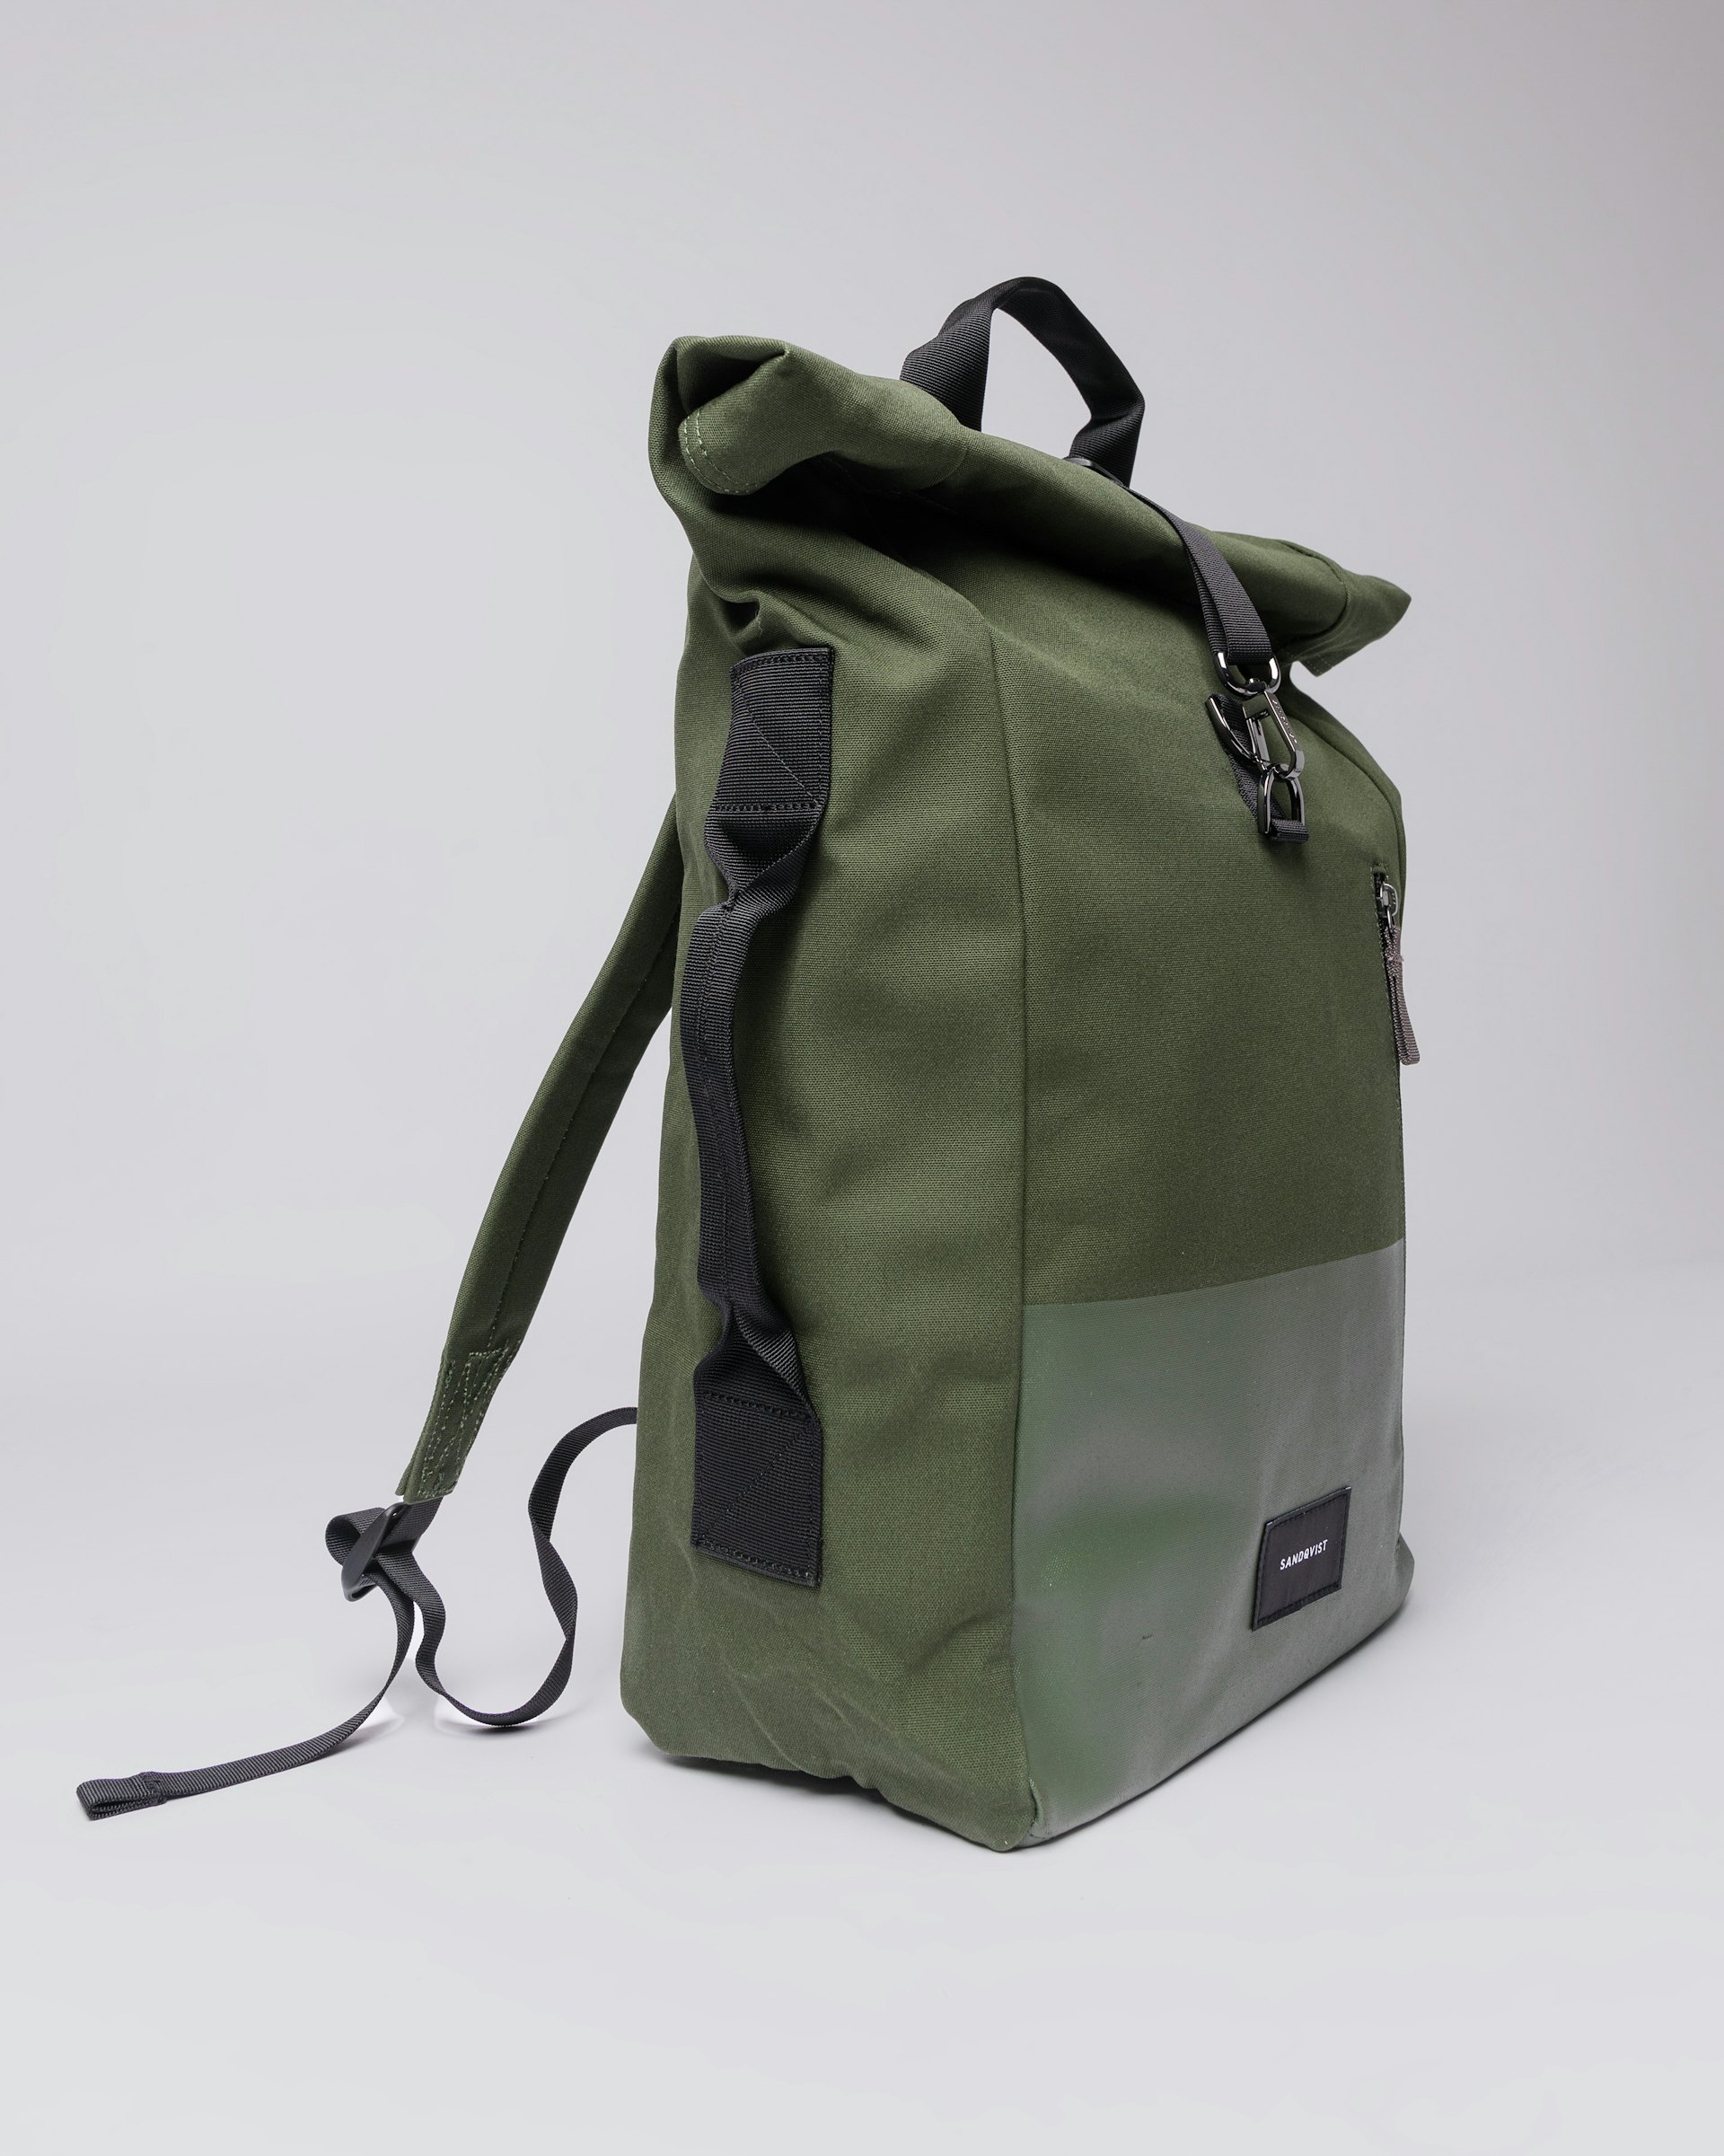 Dante vegan belongs to the category Backpacks and is in color dawn green (4 of 6)